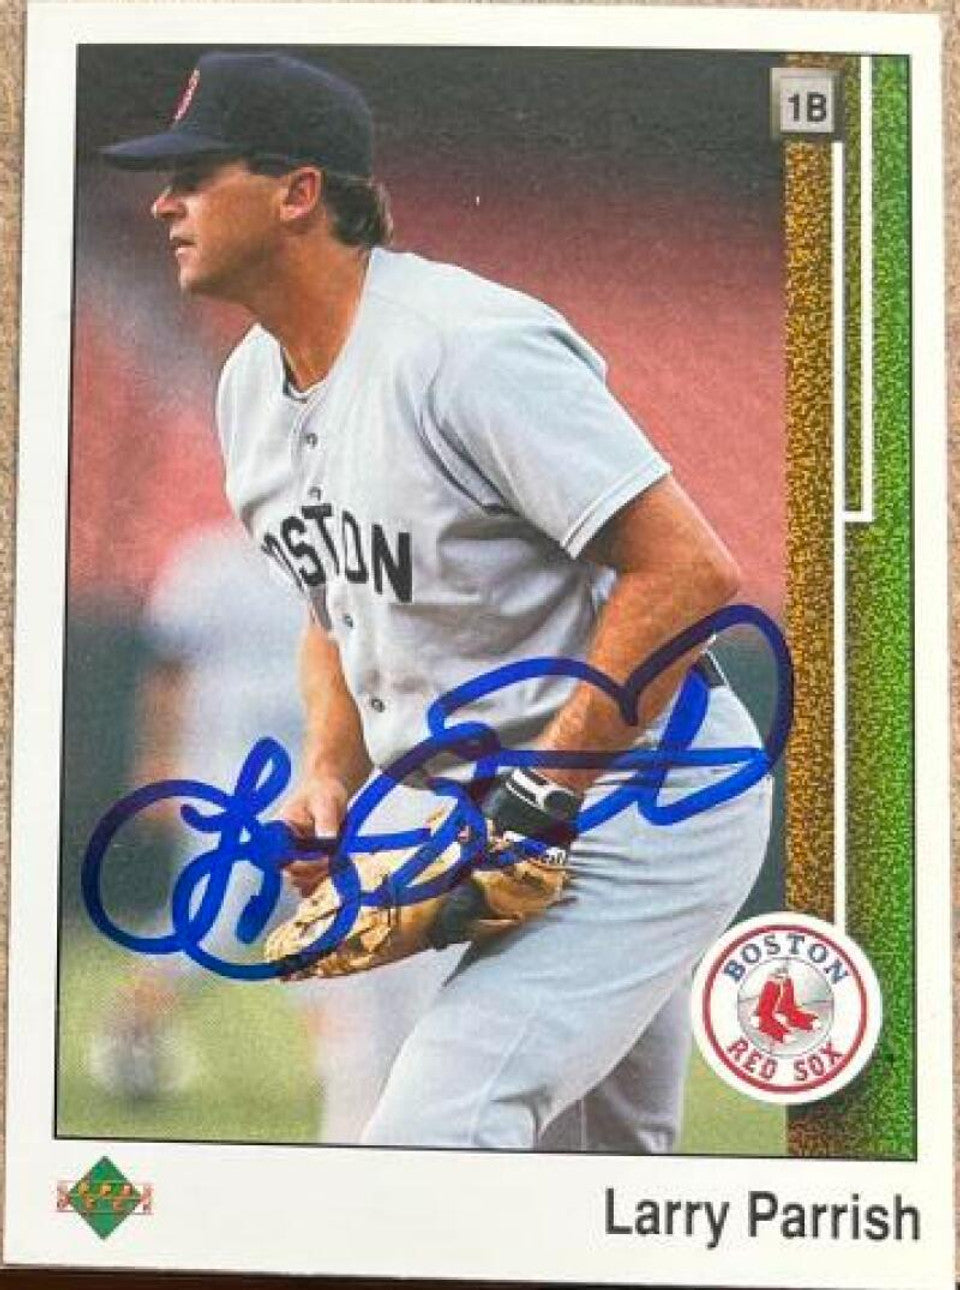 Larry Parrish Signed 1989 Upper Deck Baseball Card - Boston Red Sox